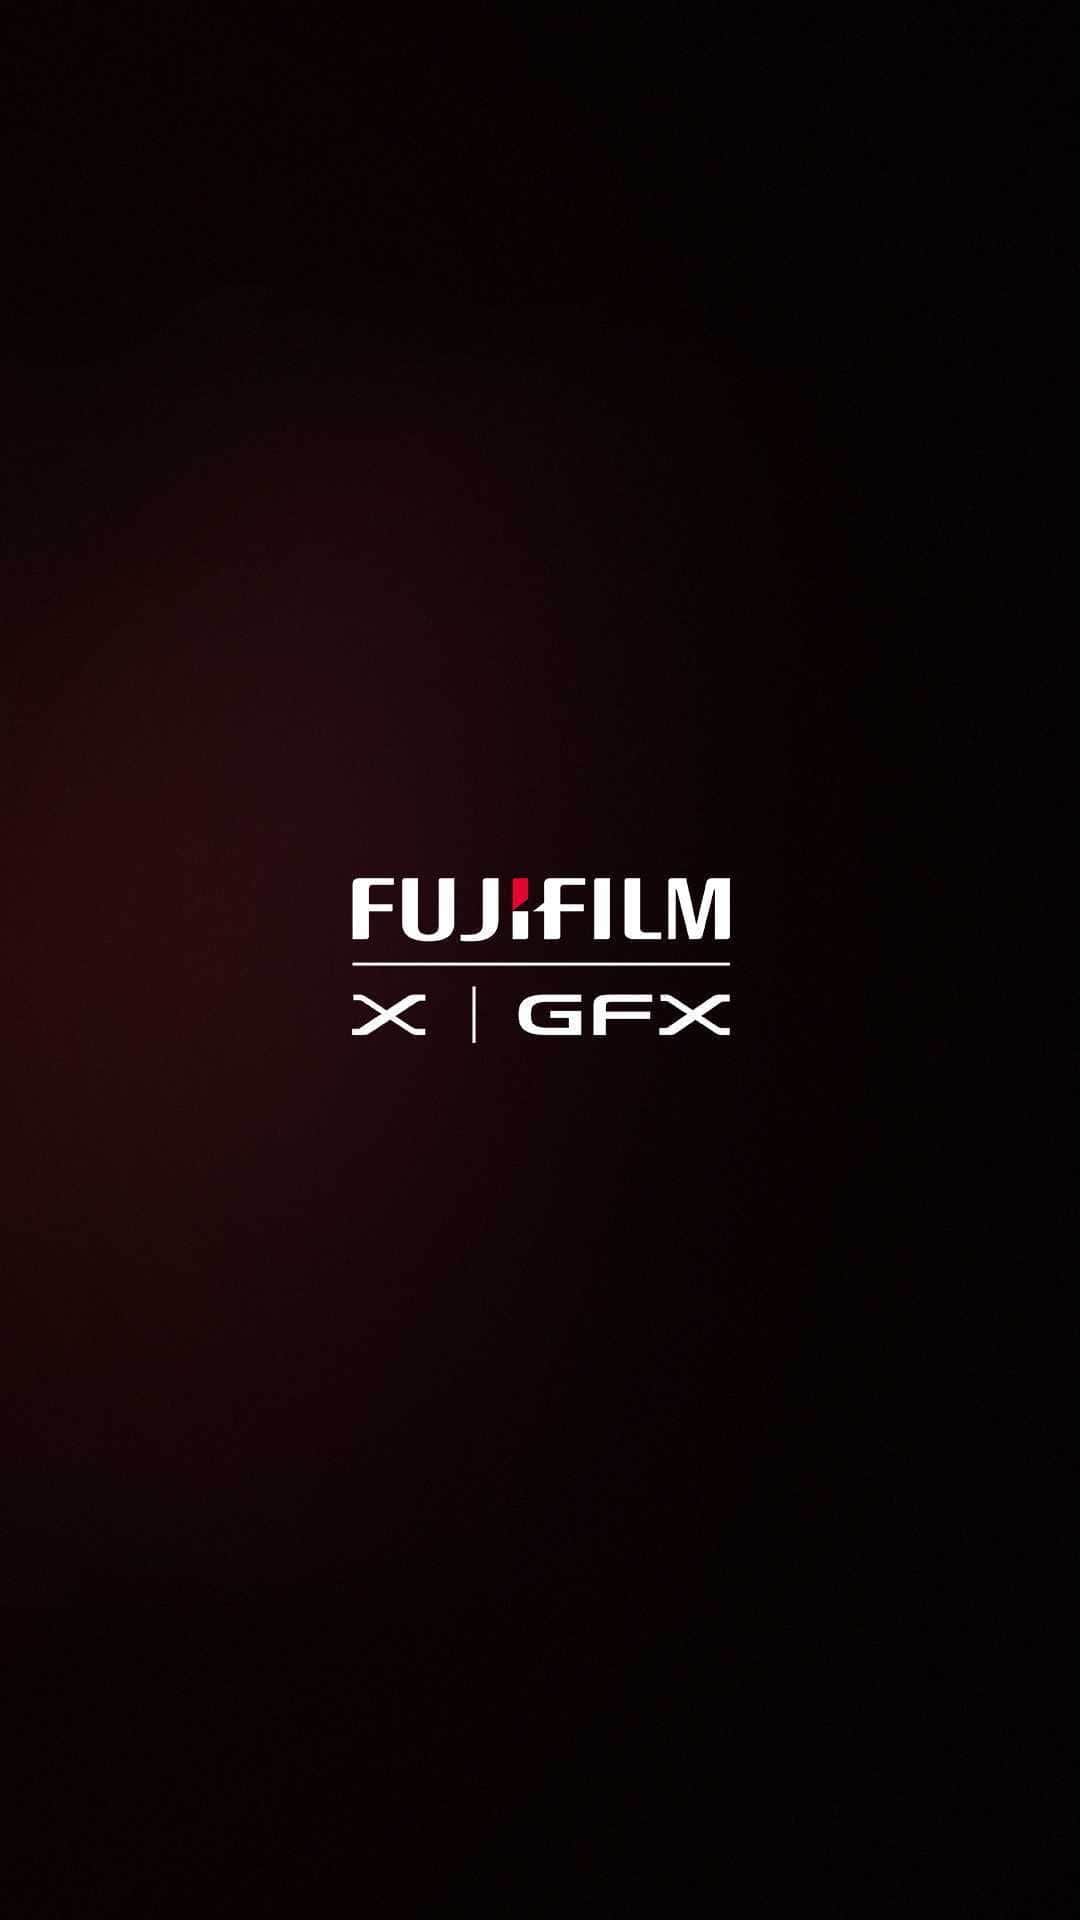 Fujifilm UKのインスタグラム：「Say hello to the GFX 100 II 👋 Decades of experience, knowledge and research in one camera.  📷 Newly-developed 102MP high-speed image sensor  ⚡ High-speed image processing engine X-Processor 5 delivers up to double the signal readout speed compared to GFX100 👀 AI-based subject-detection AF developed with Deep Learning technology 💥 8FPS burst shooting 📹 4K/60P 4:2:2 10-bit video internal recording and supports 8K/30P video 🔍 Class leading 9.44 million dot electronic viewfinder with 1.0x magnification 🎞 NEW Film Simulation REALA ACE 📷 8-stop five-axis In-Body Image Stabilisation  There's more - stay tuned to find out everything we announced at #XSummit.  #MoreThanFullFrame」